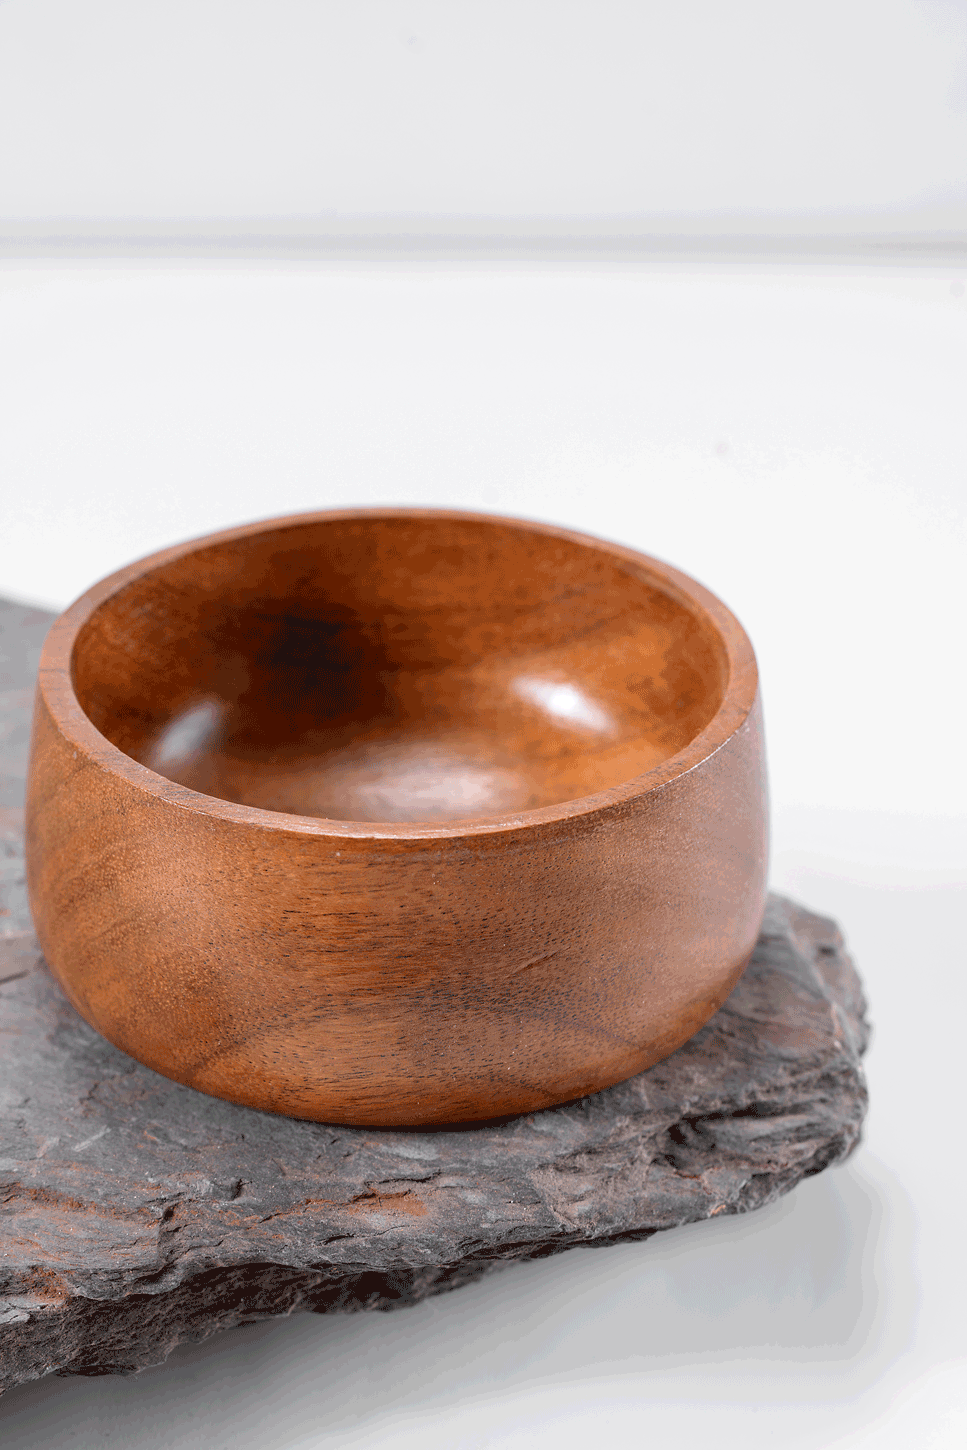 Gumbad - Small wooden dip bowls (set of 2), a product by Araana Homes